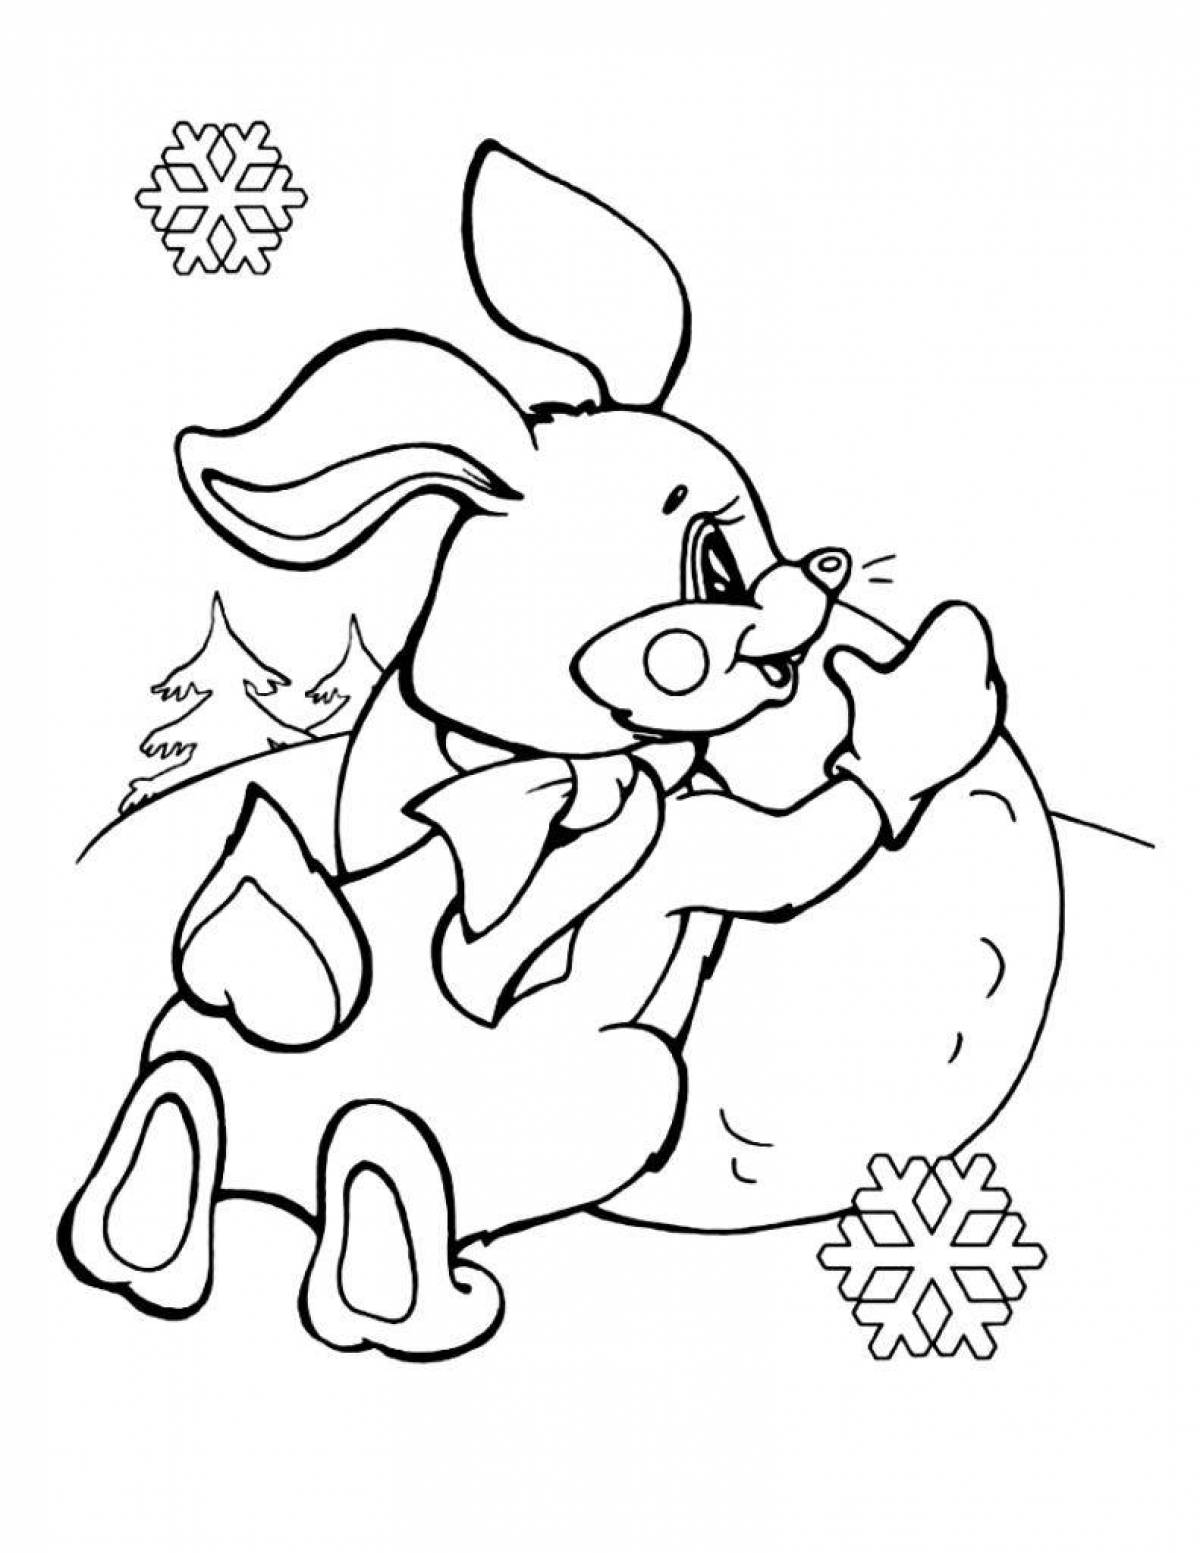 Brilliant hare new year 2023 coloring book